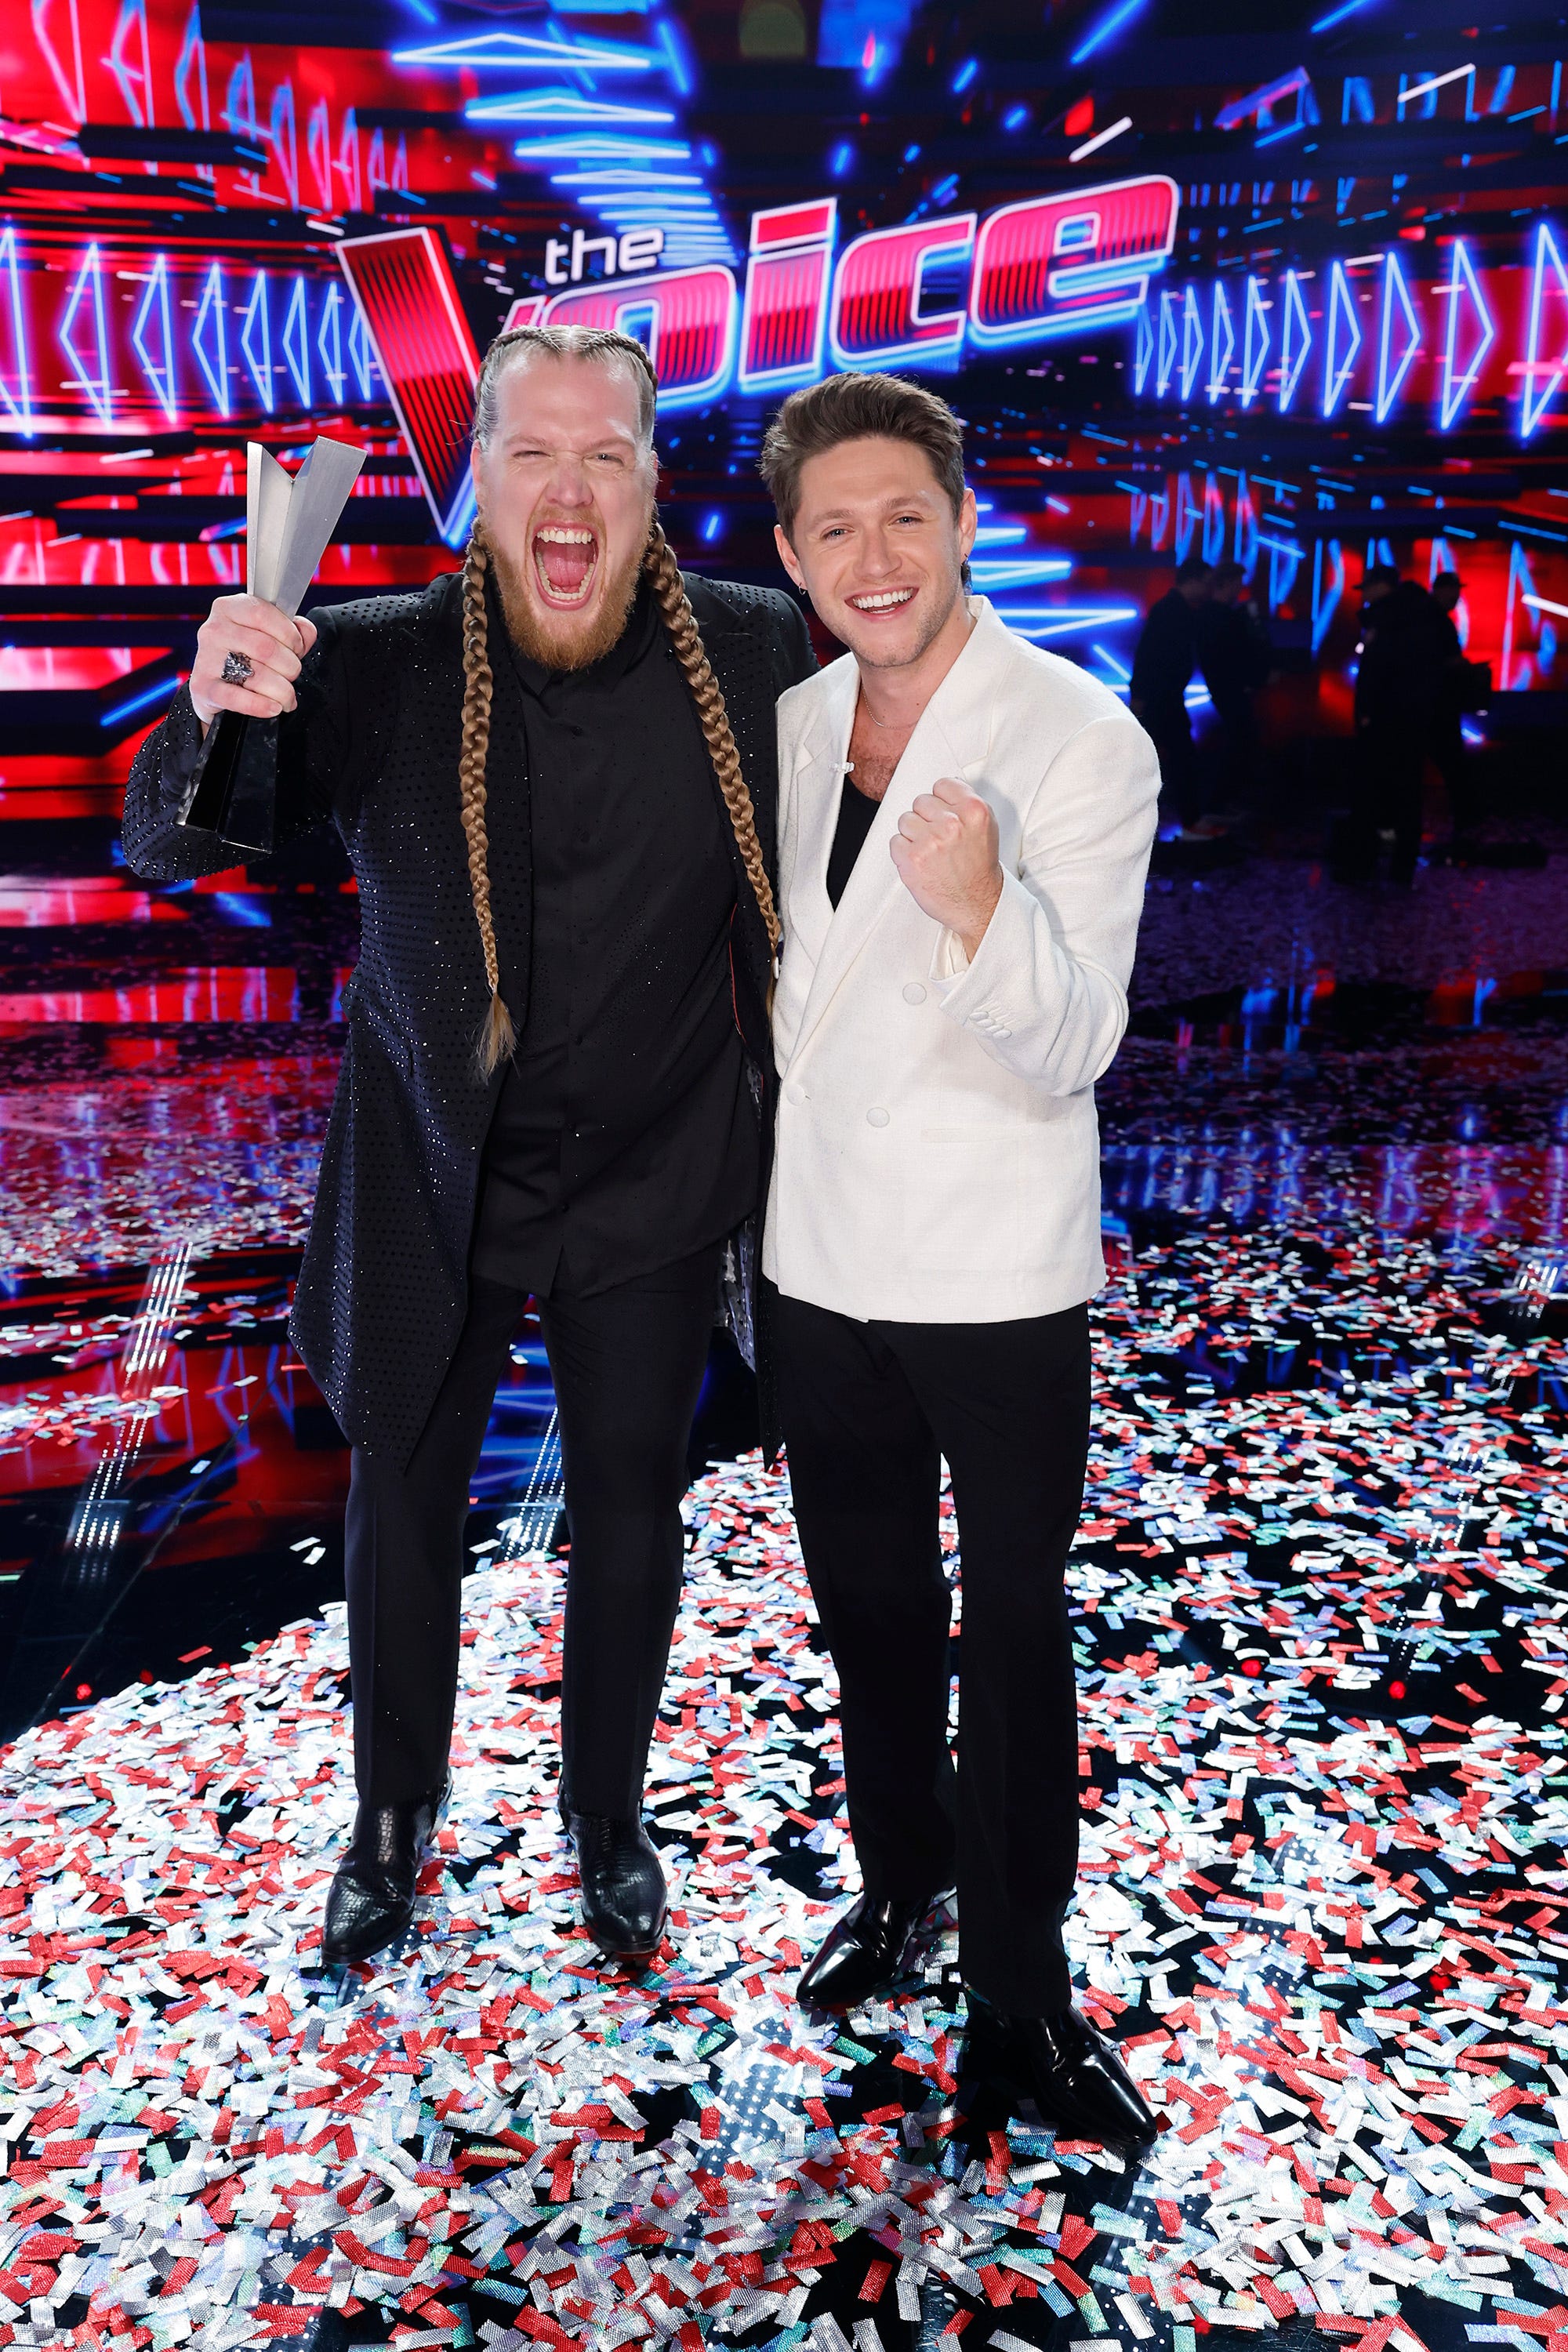 'The Voice' contestant Tom Nitti reveals 'gut-wrenching' reason for mid-season departure